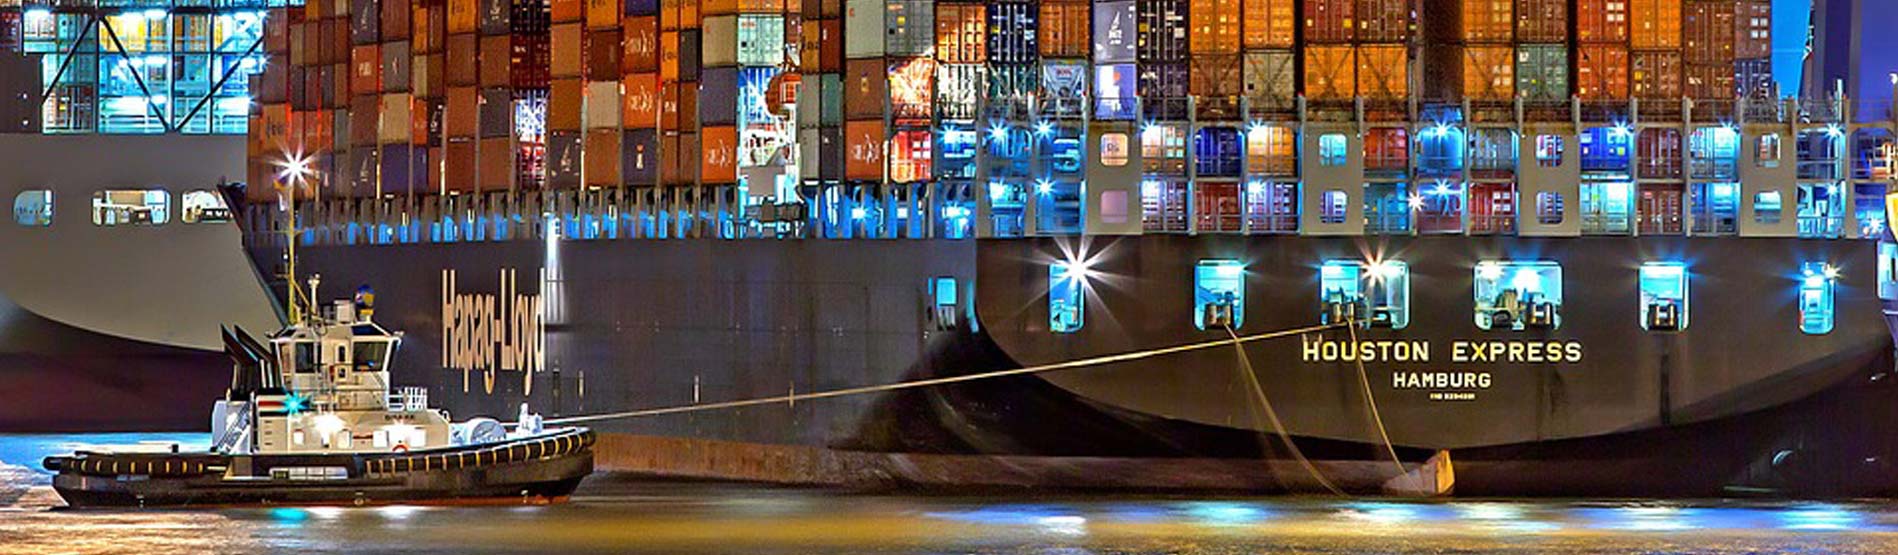 A brightly lit container ship at night